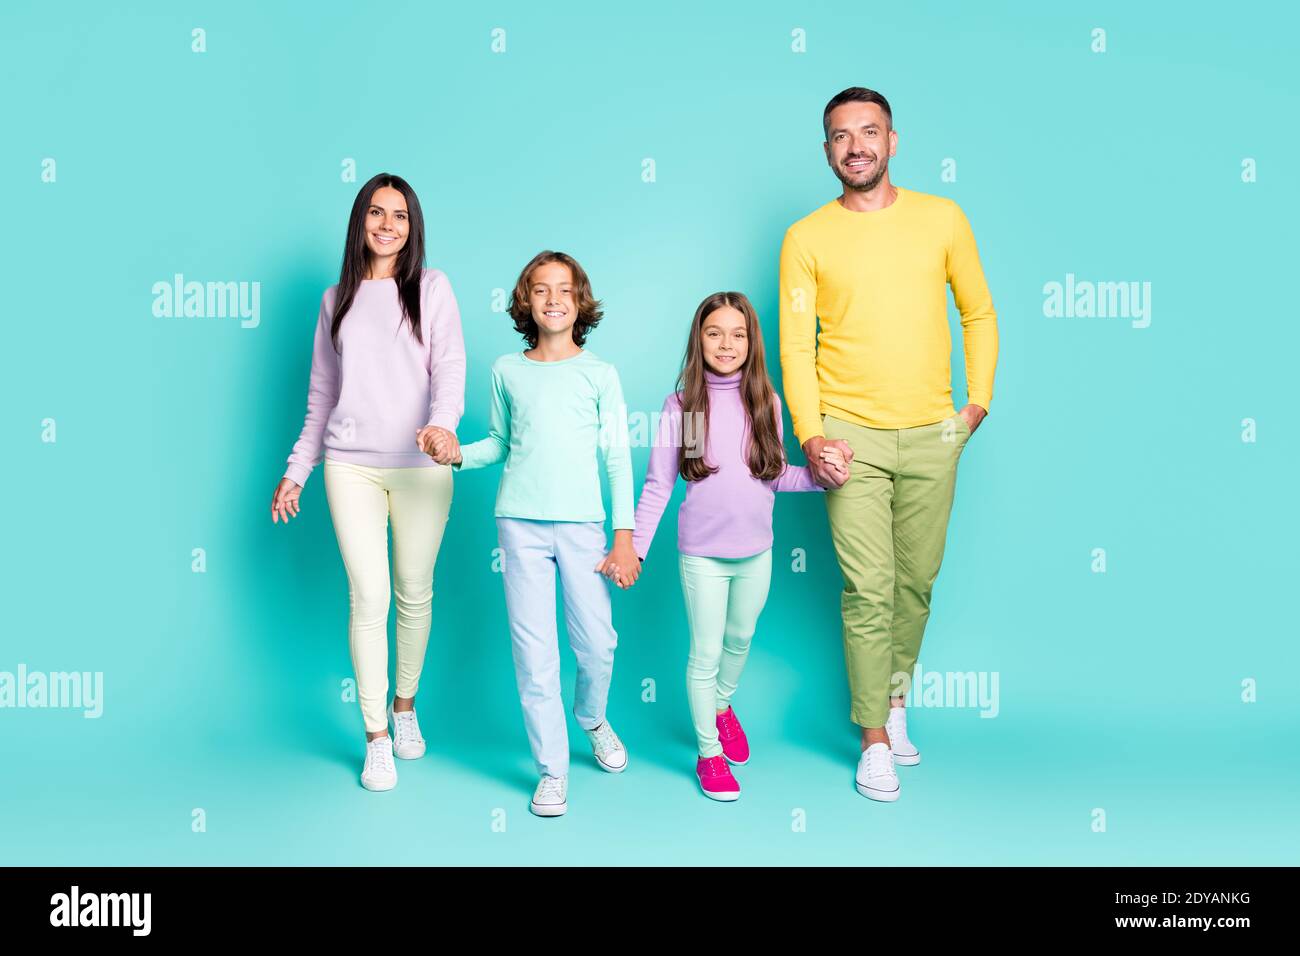 Photo portrait of full family walking forward holding hands isolated on vivid teal colored background Stock Photo